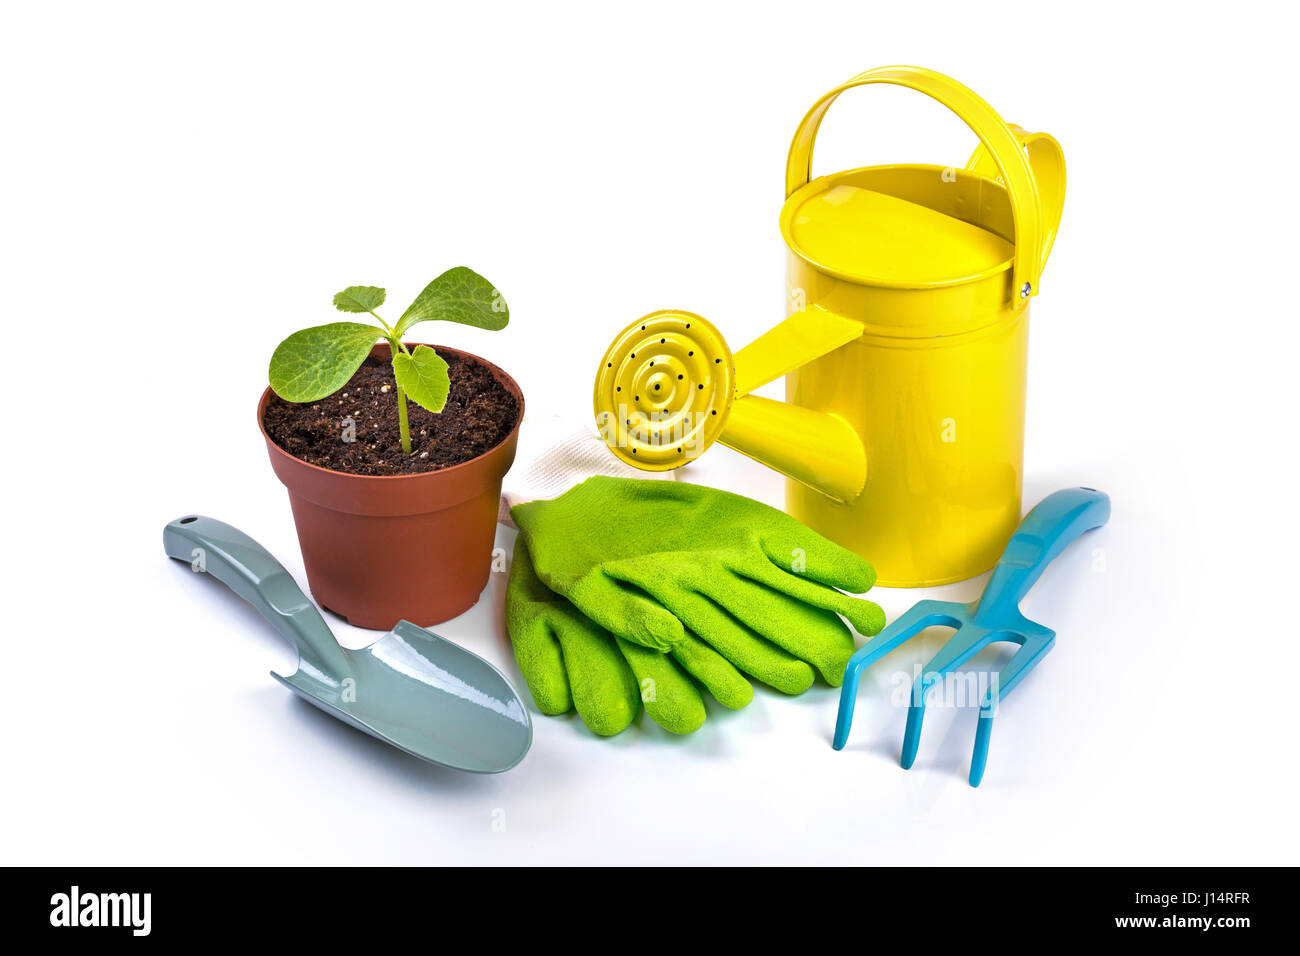 gardening equipment and potted plant isolated on white background Stock Photo